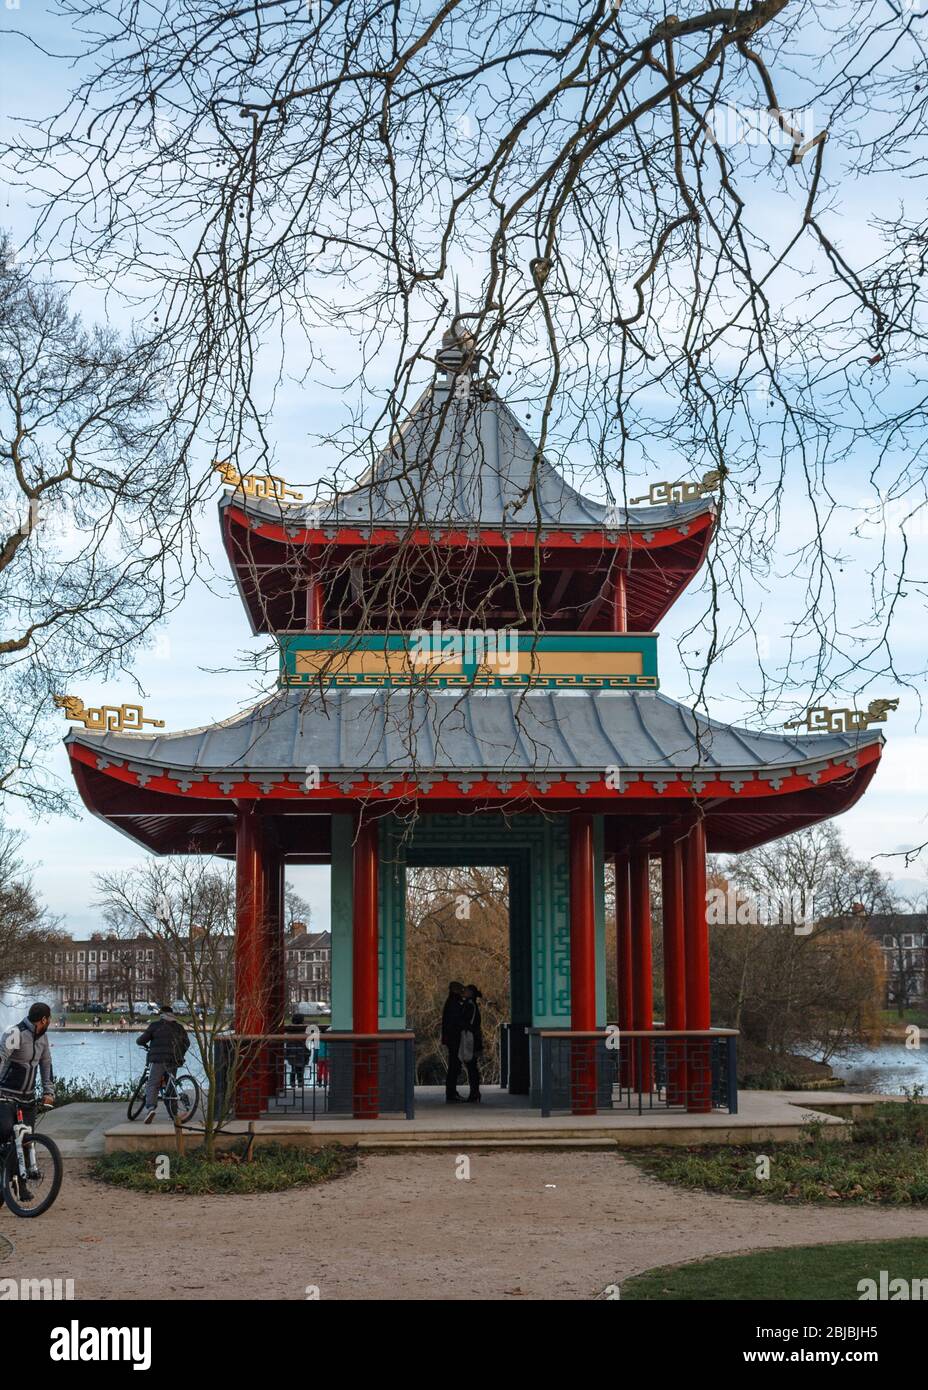 Two people kissing beneath the Chinese Pagoda in London's Victoria Park in winter Stock Photo